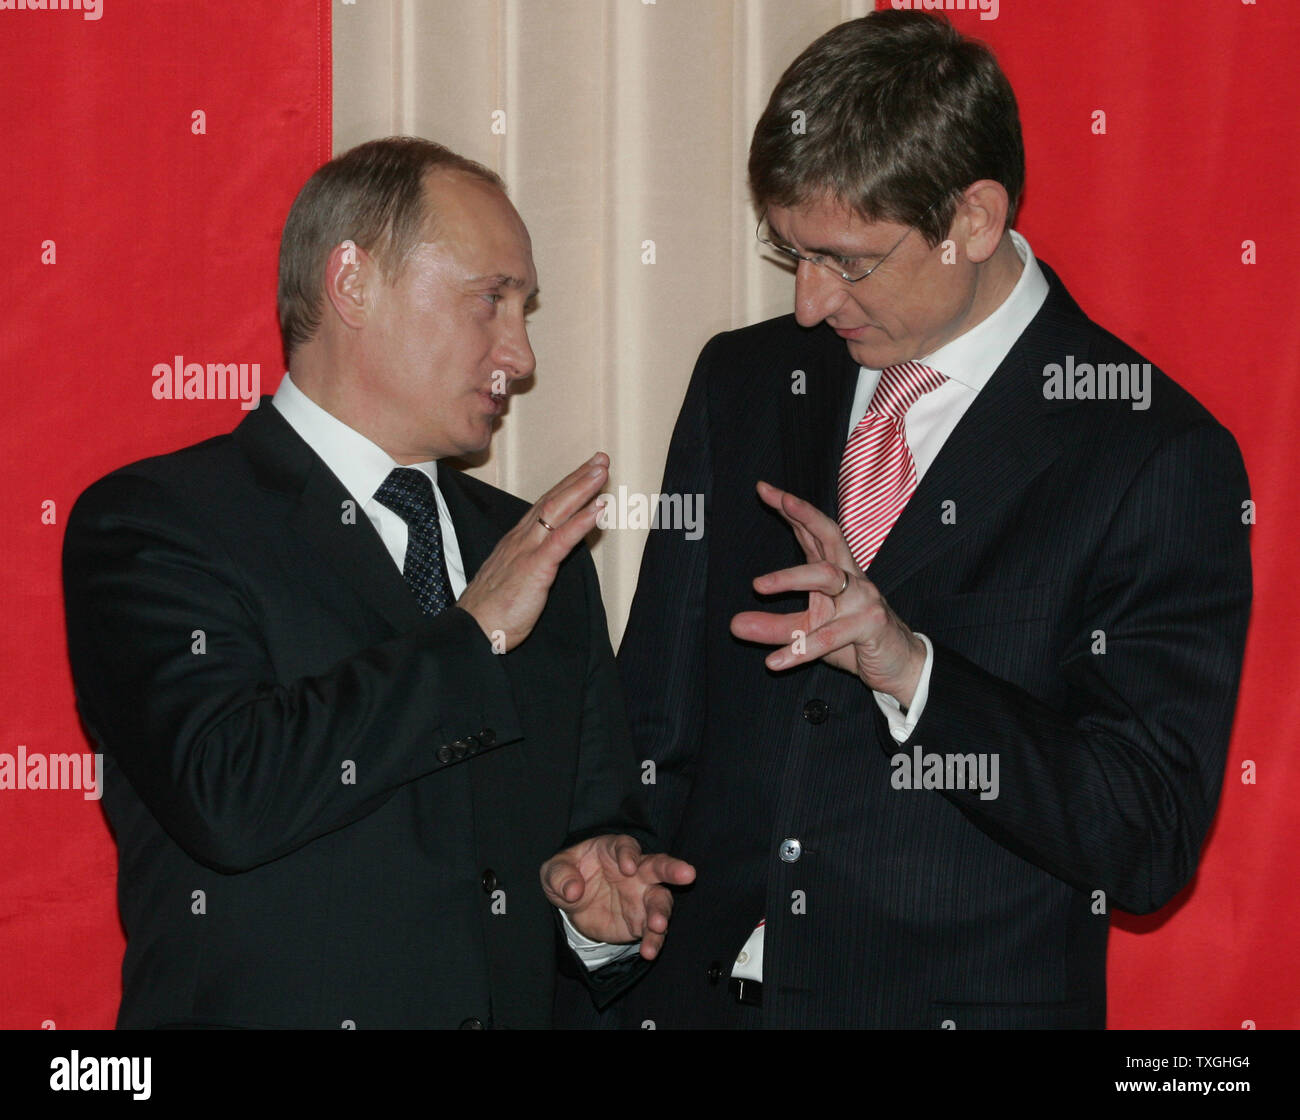 Russian President Vladimir Putin (L) and Hungarian Prime Minister Ferenc Gyurcsany talk before their meeting in Budapest, February 28, 2006. Putin visited Hungary to discuss economic and energy issues. (UPI Photo/Anatoli Zhdanov) Stock Photo